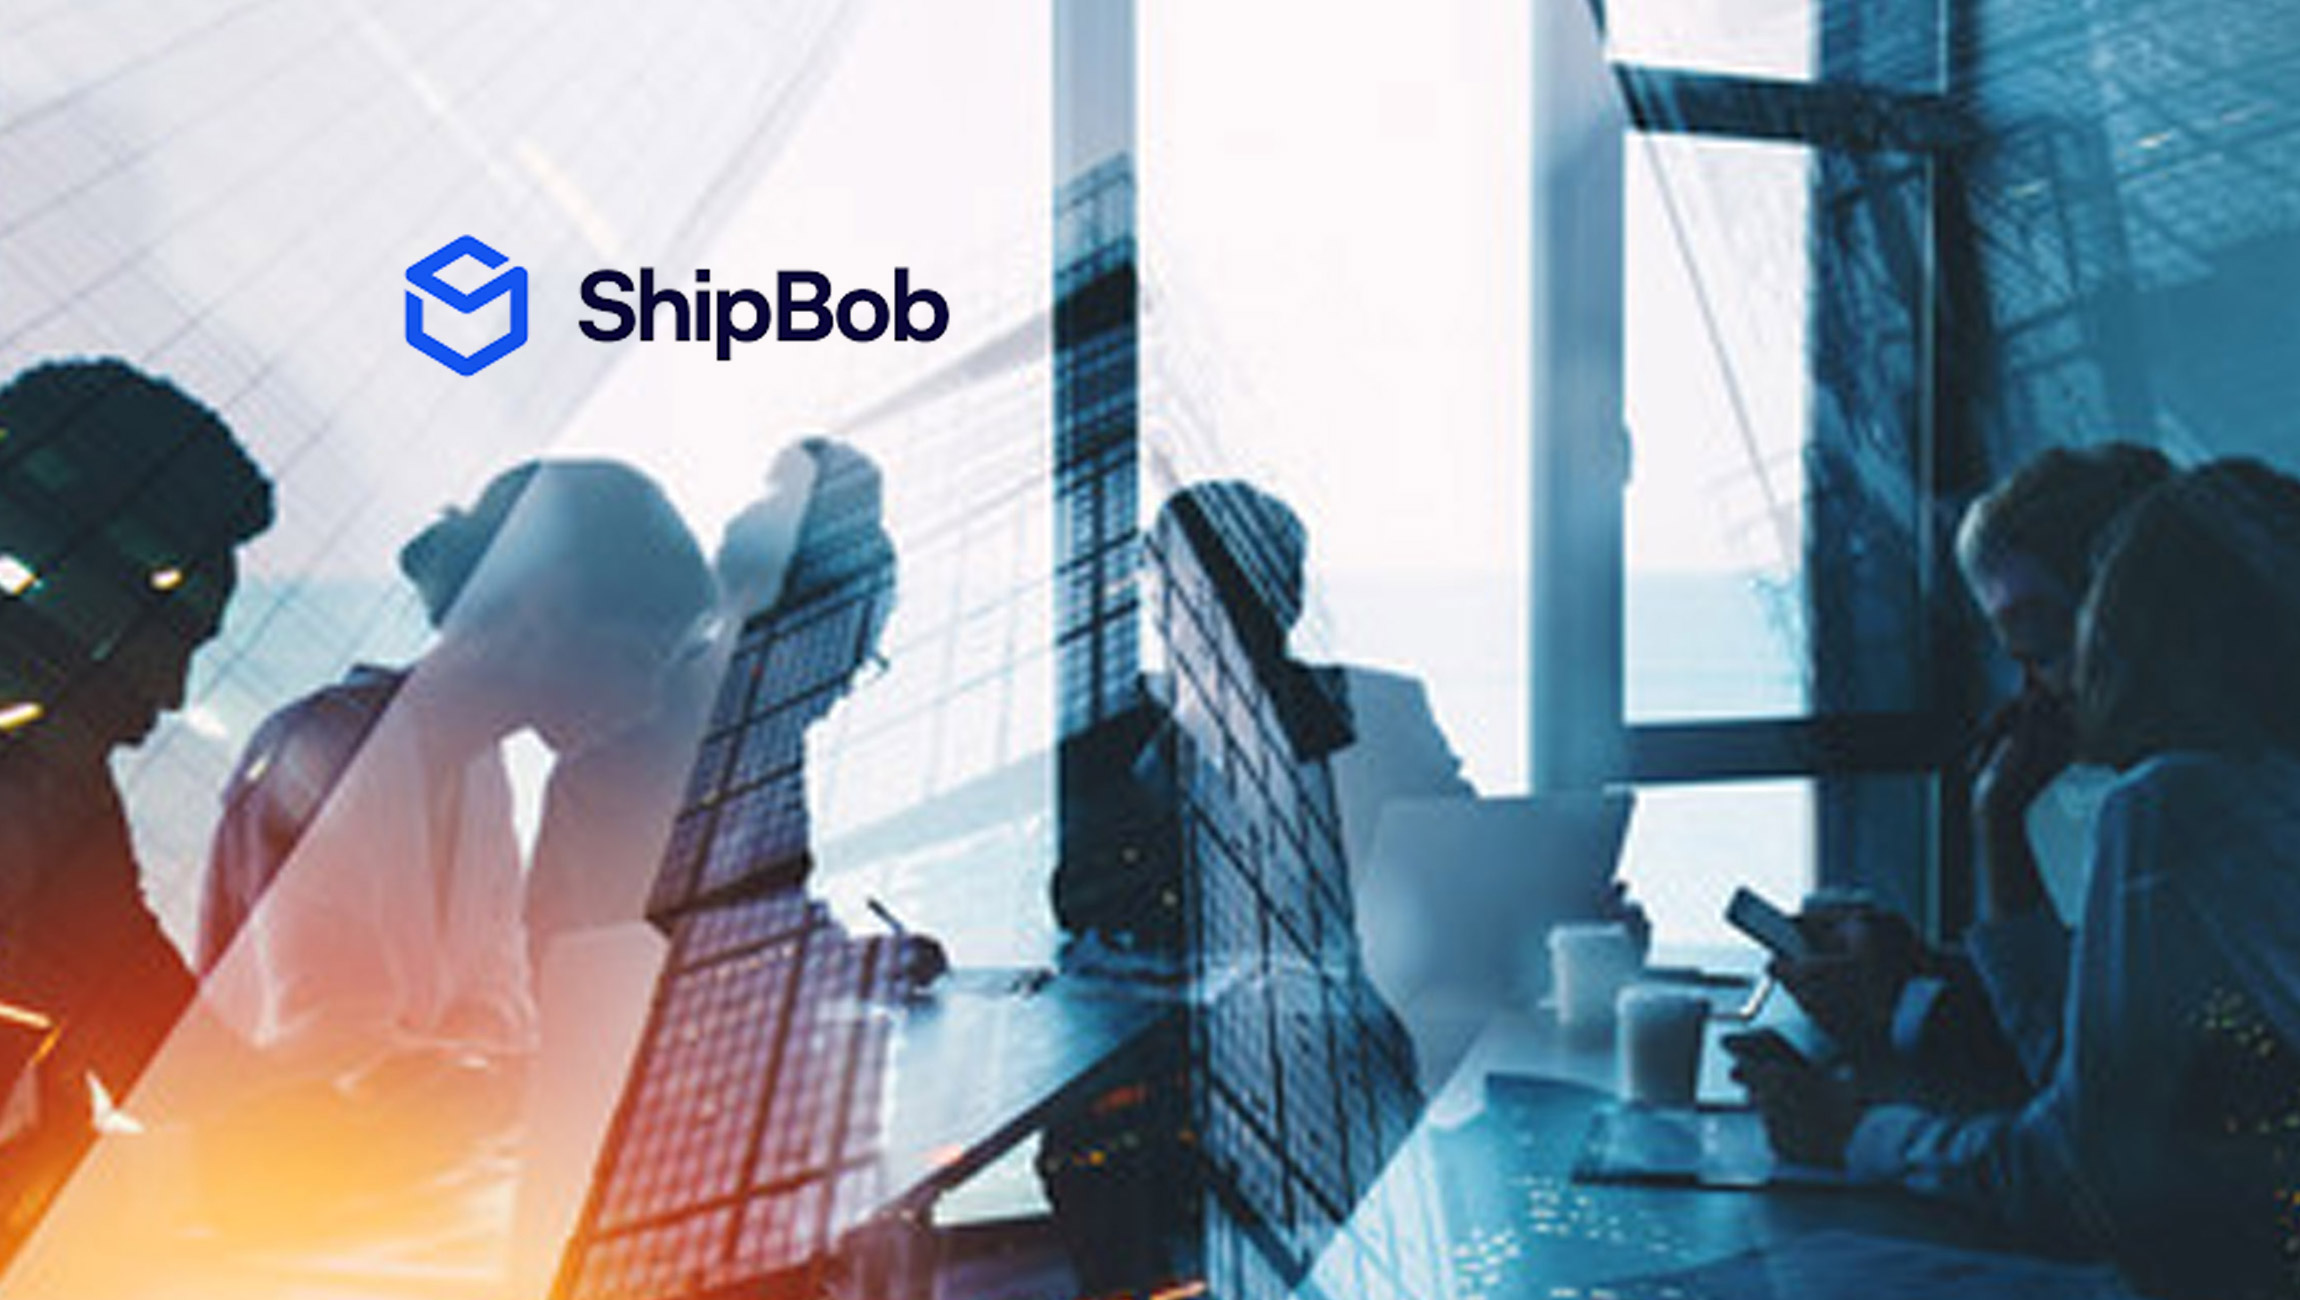 ShipBob’s Delivered Duty Paid (DDP) Shipping Solution Now Available Across Its Global Fulfillment Network